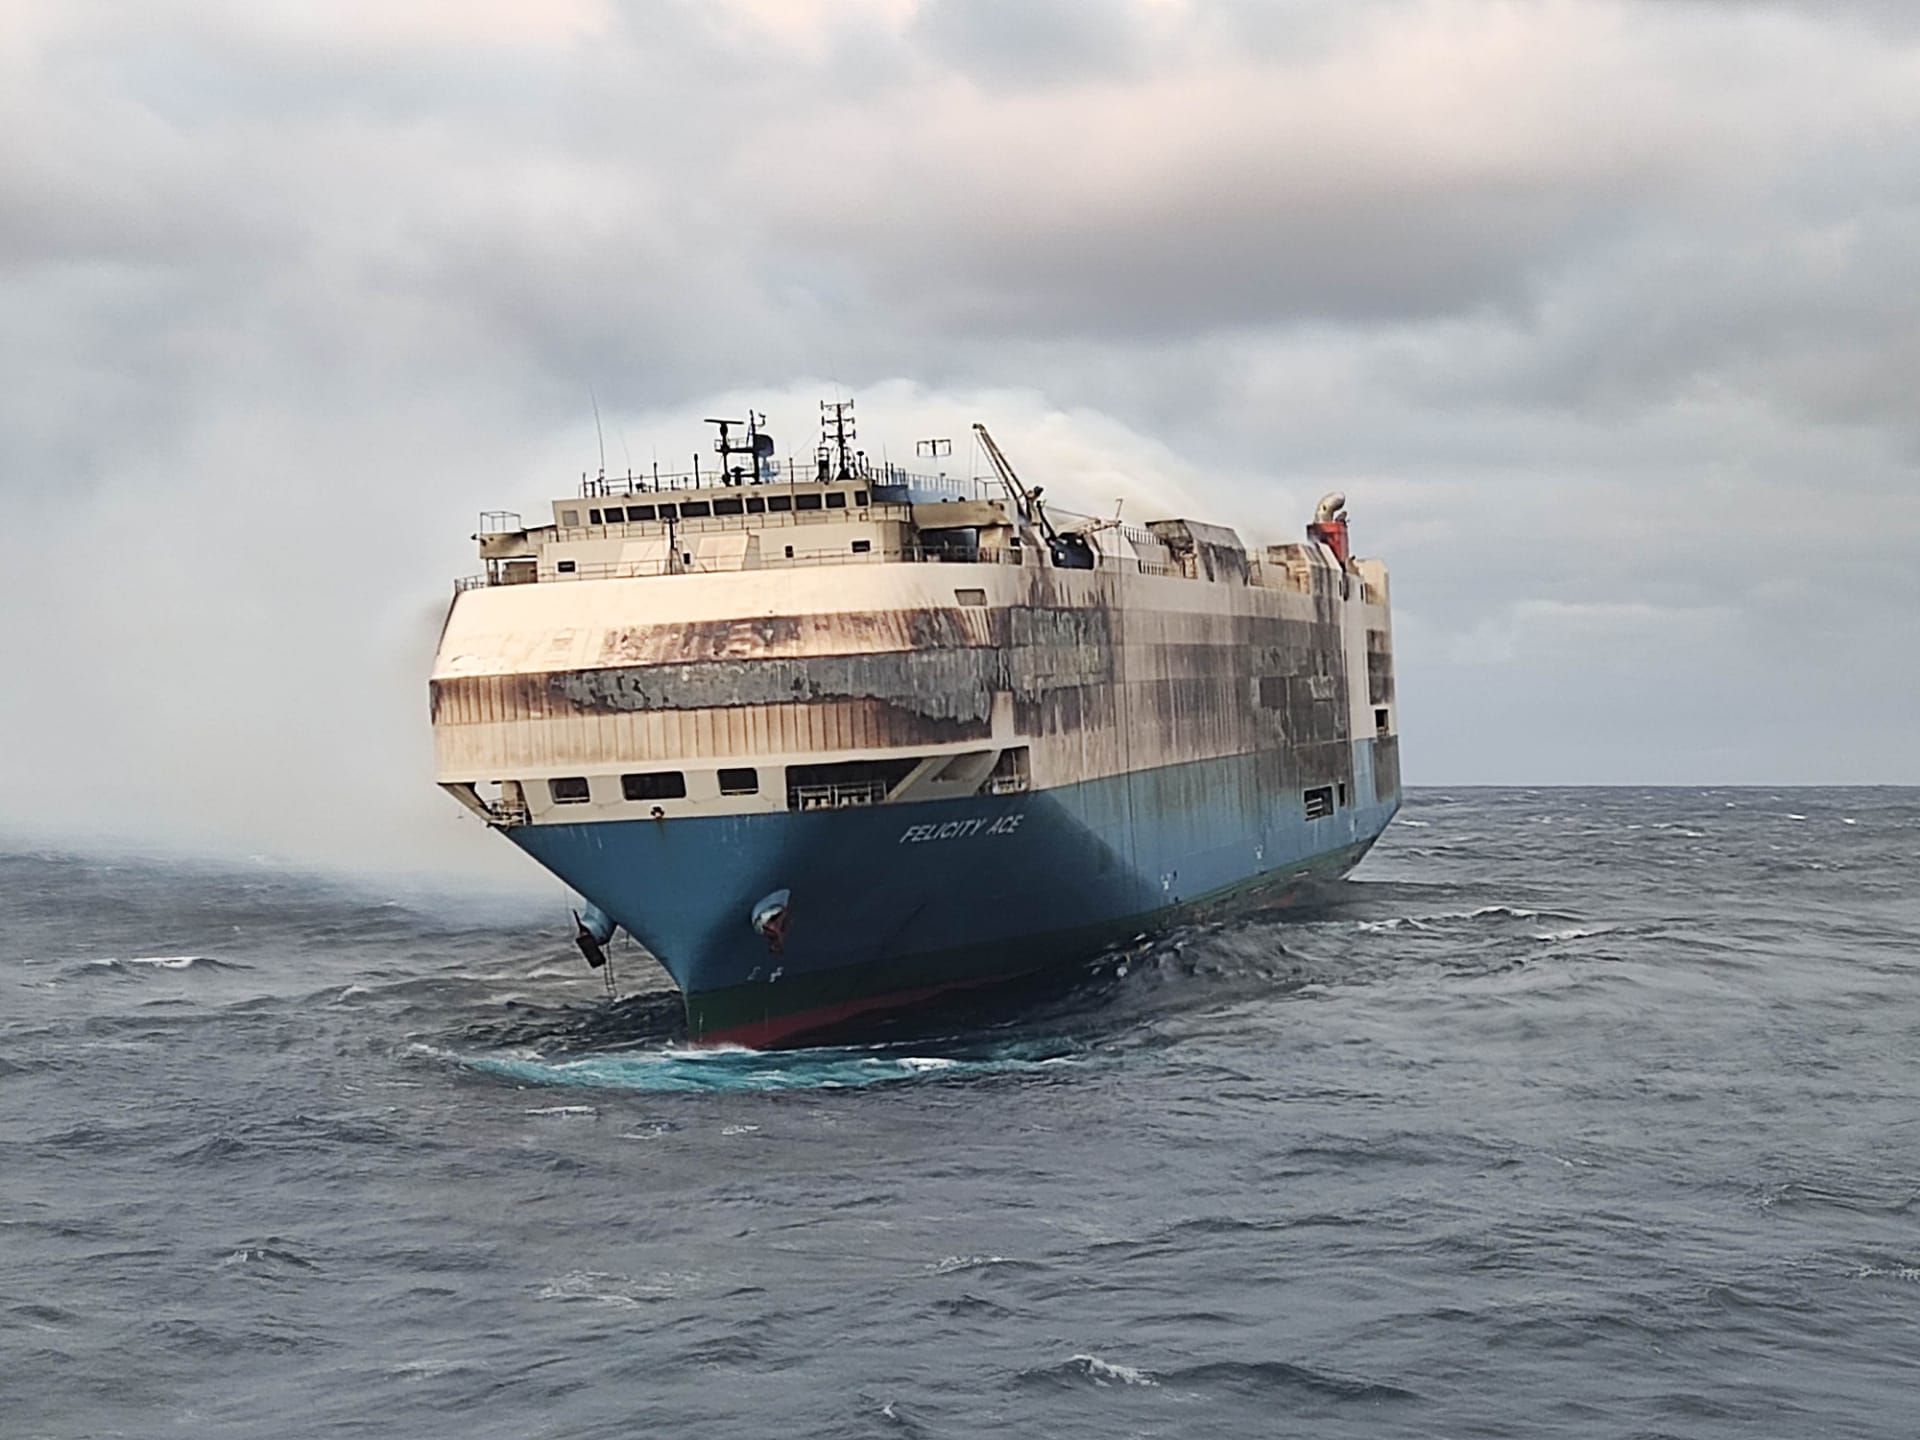 Felicity Ace Car Carrier Continues to Burn in Mid-Atlantic – Photos